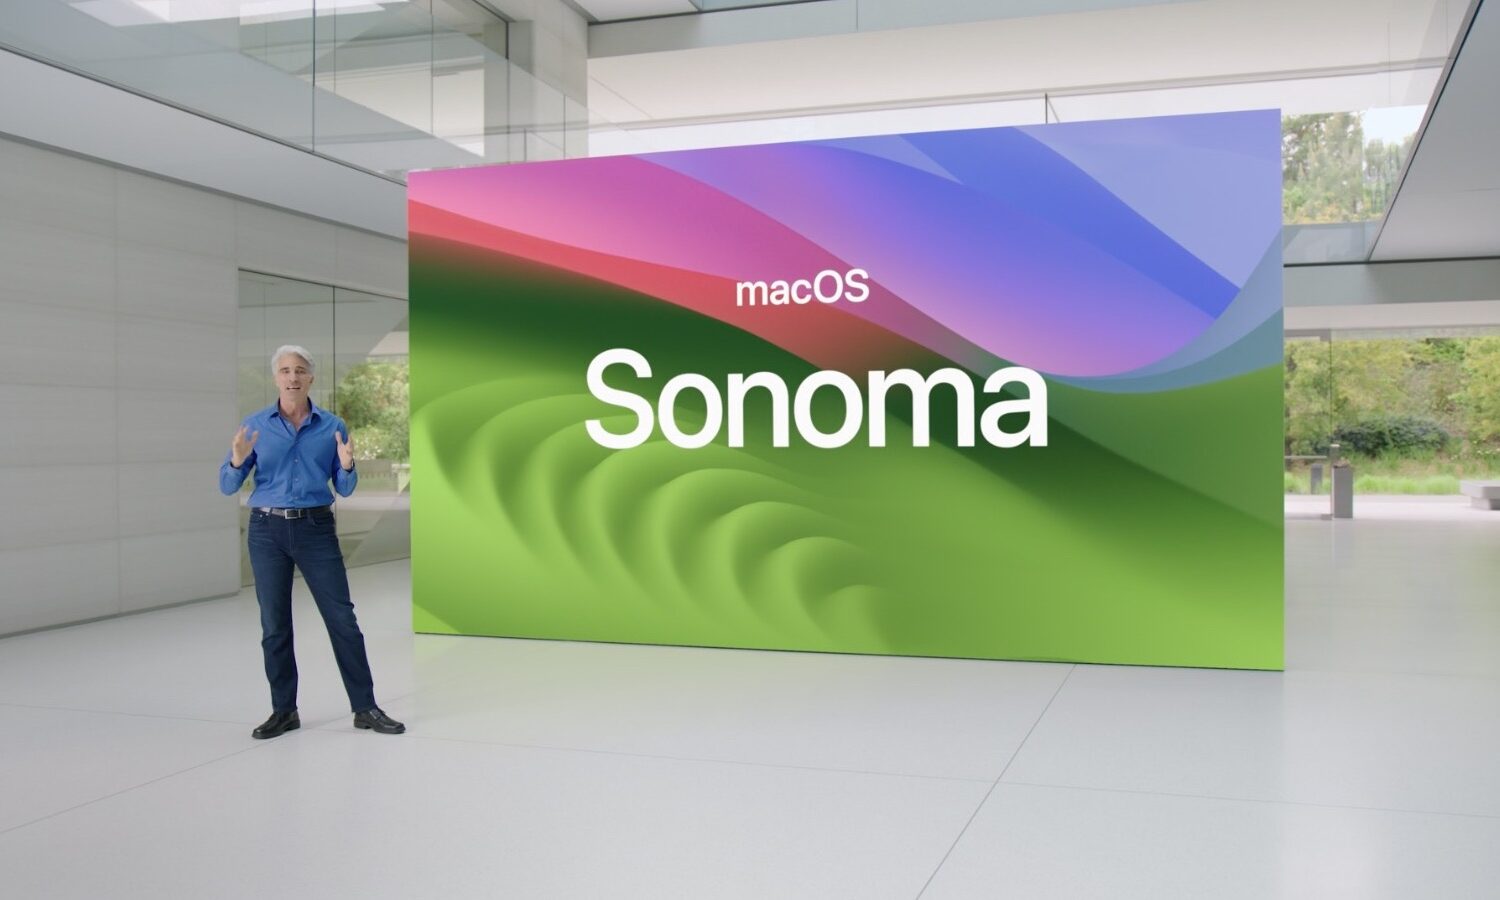 Craig Federighi at WWDC23 standing in front of huge slide showing the macOS Sonoma wallpaper